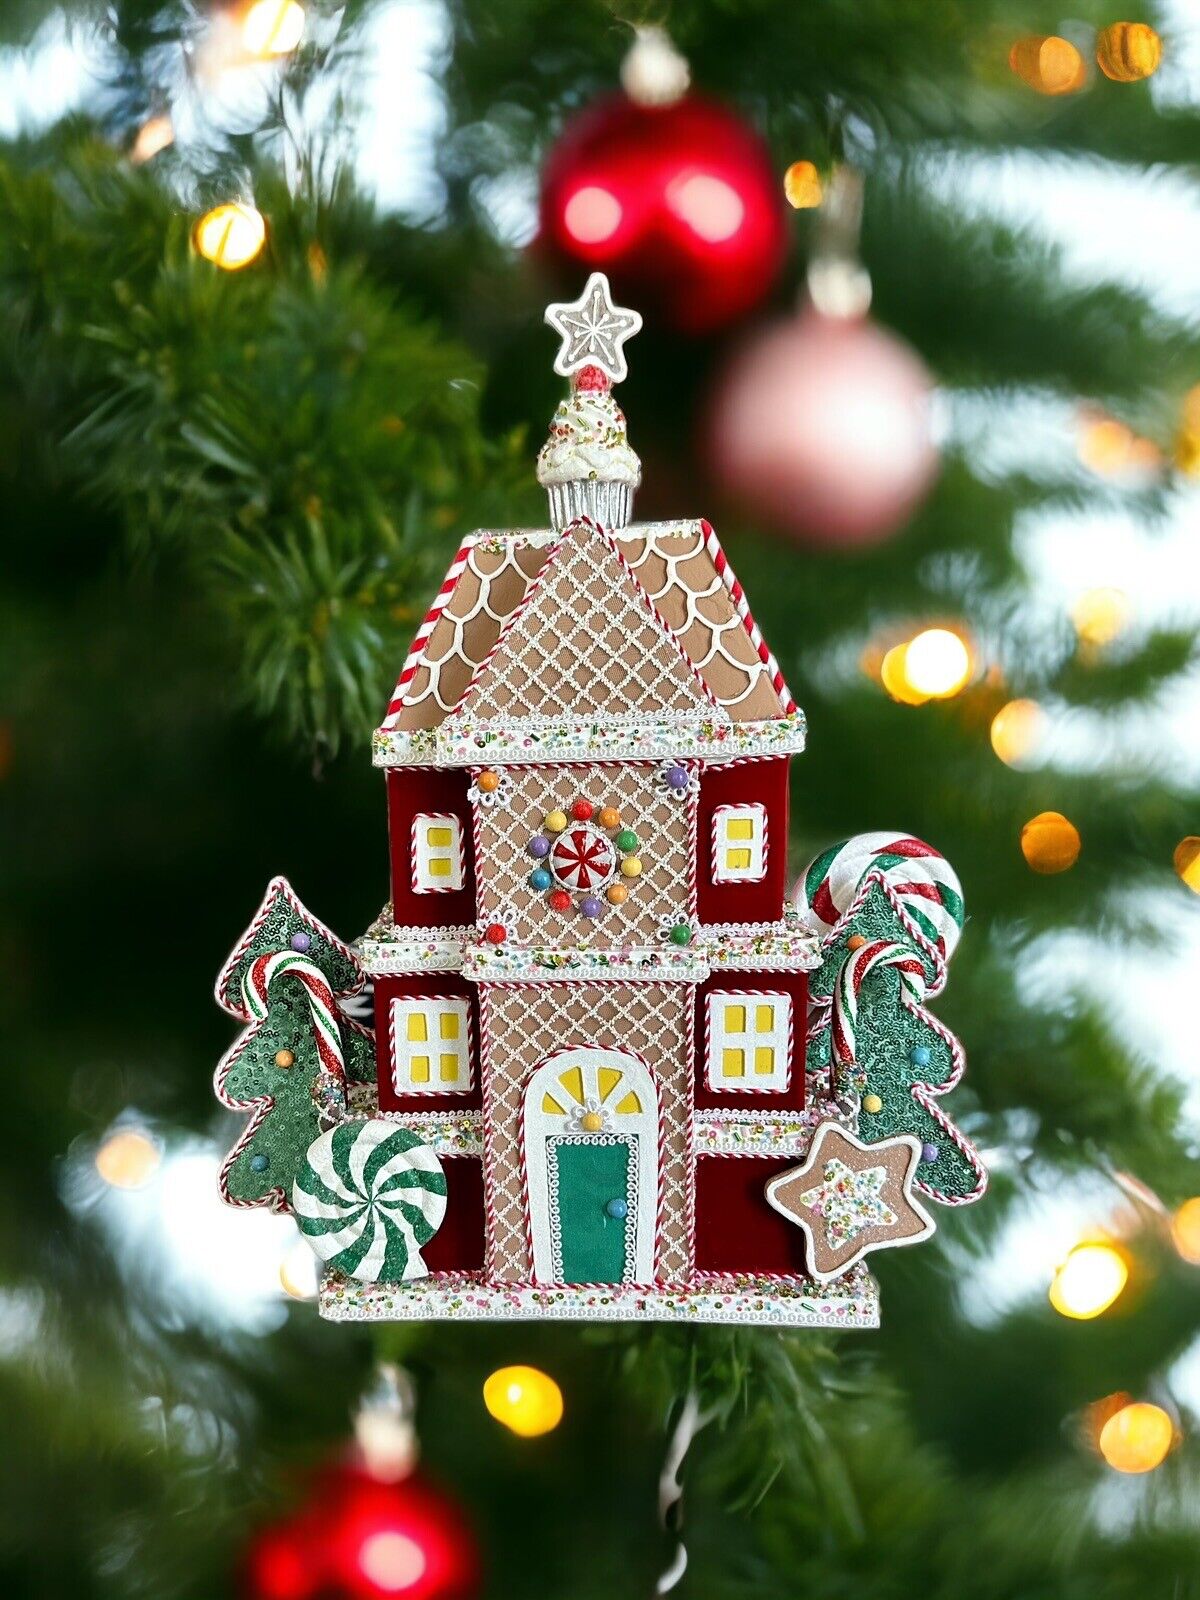 Katherine’s Collection 2021 Gingerbread House Tree Tabletop Decor NWT Christmas